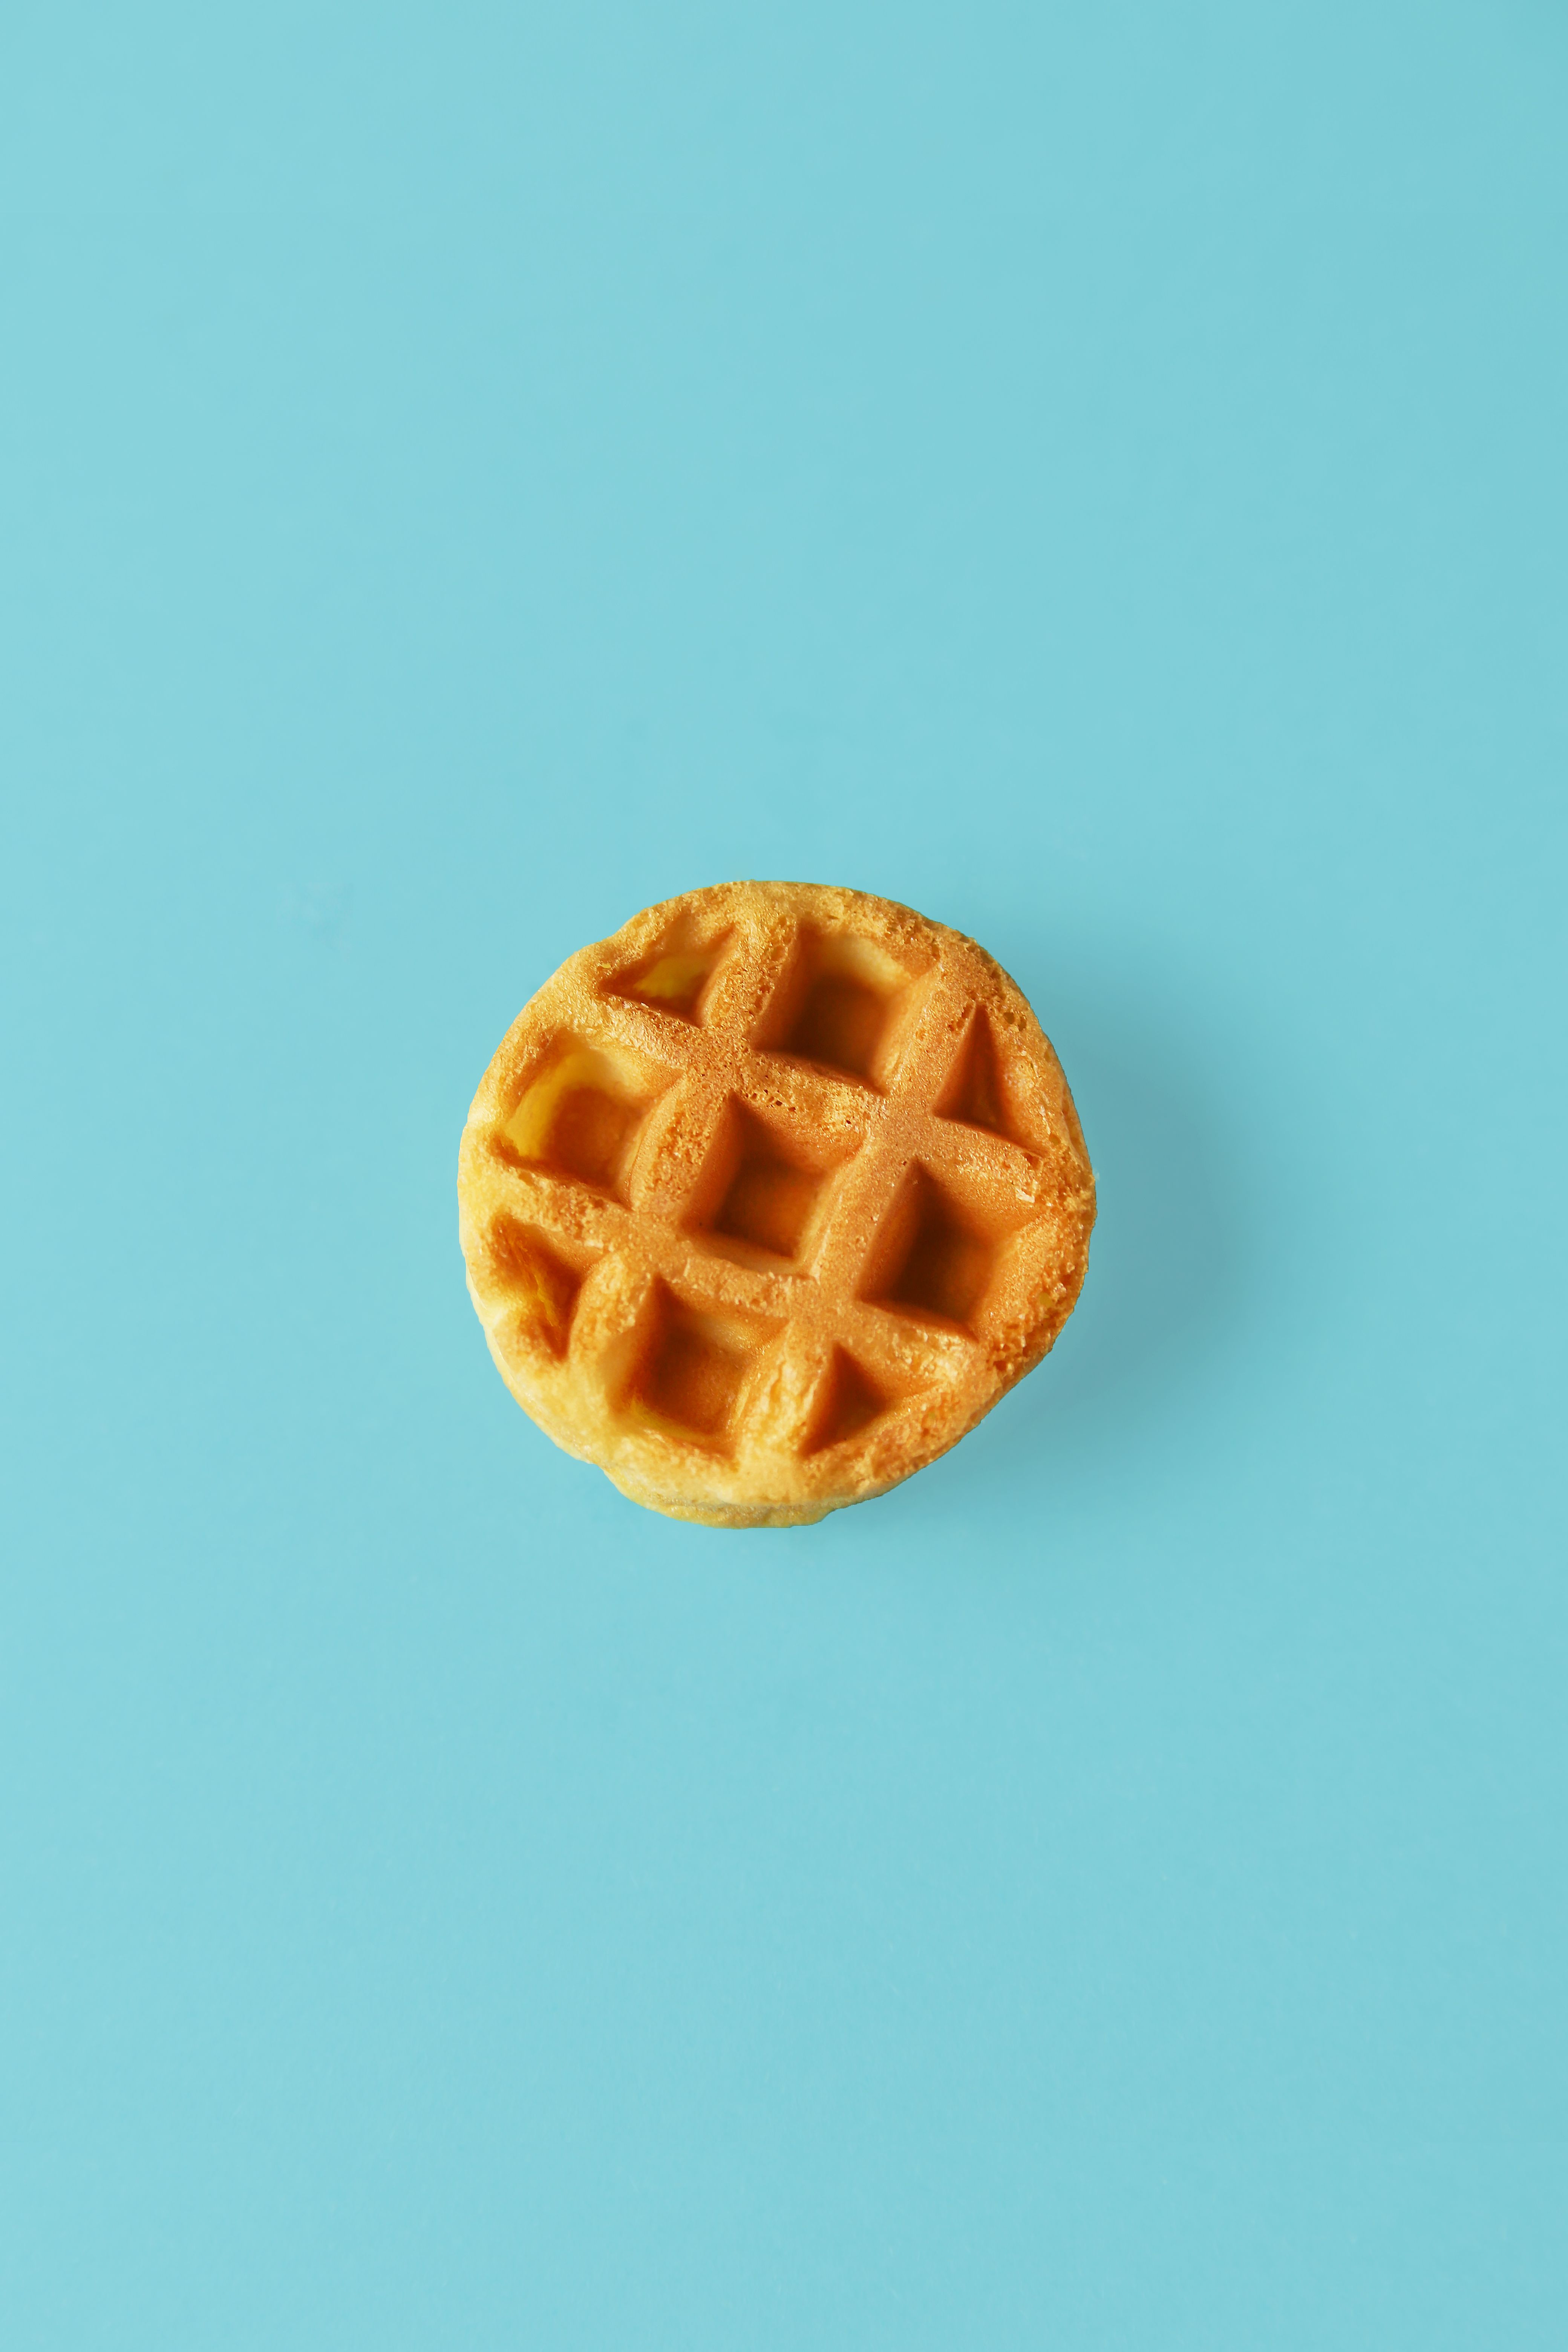 https://hips.hearstapps.com/hmg-prod/images/small-round-belgian-waffle-on-trendy-blue-royalty-free-image-1653068553.jpg